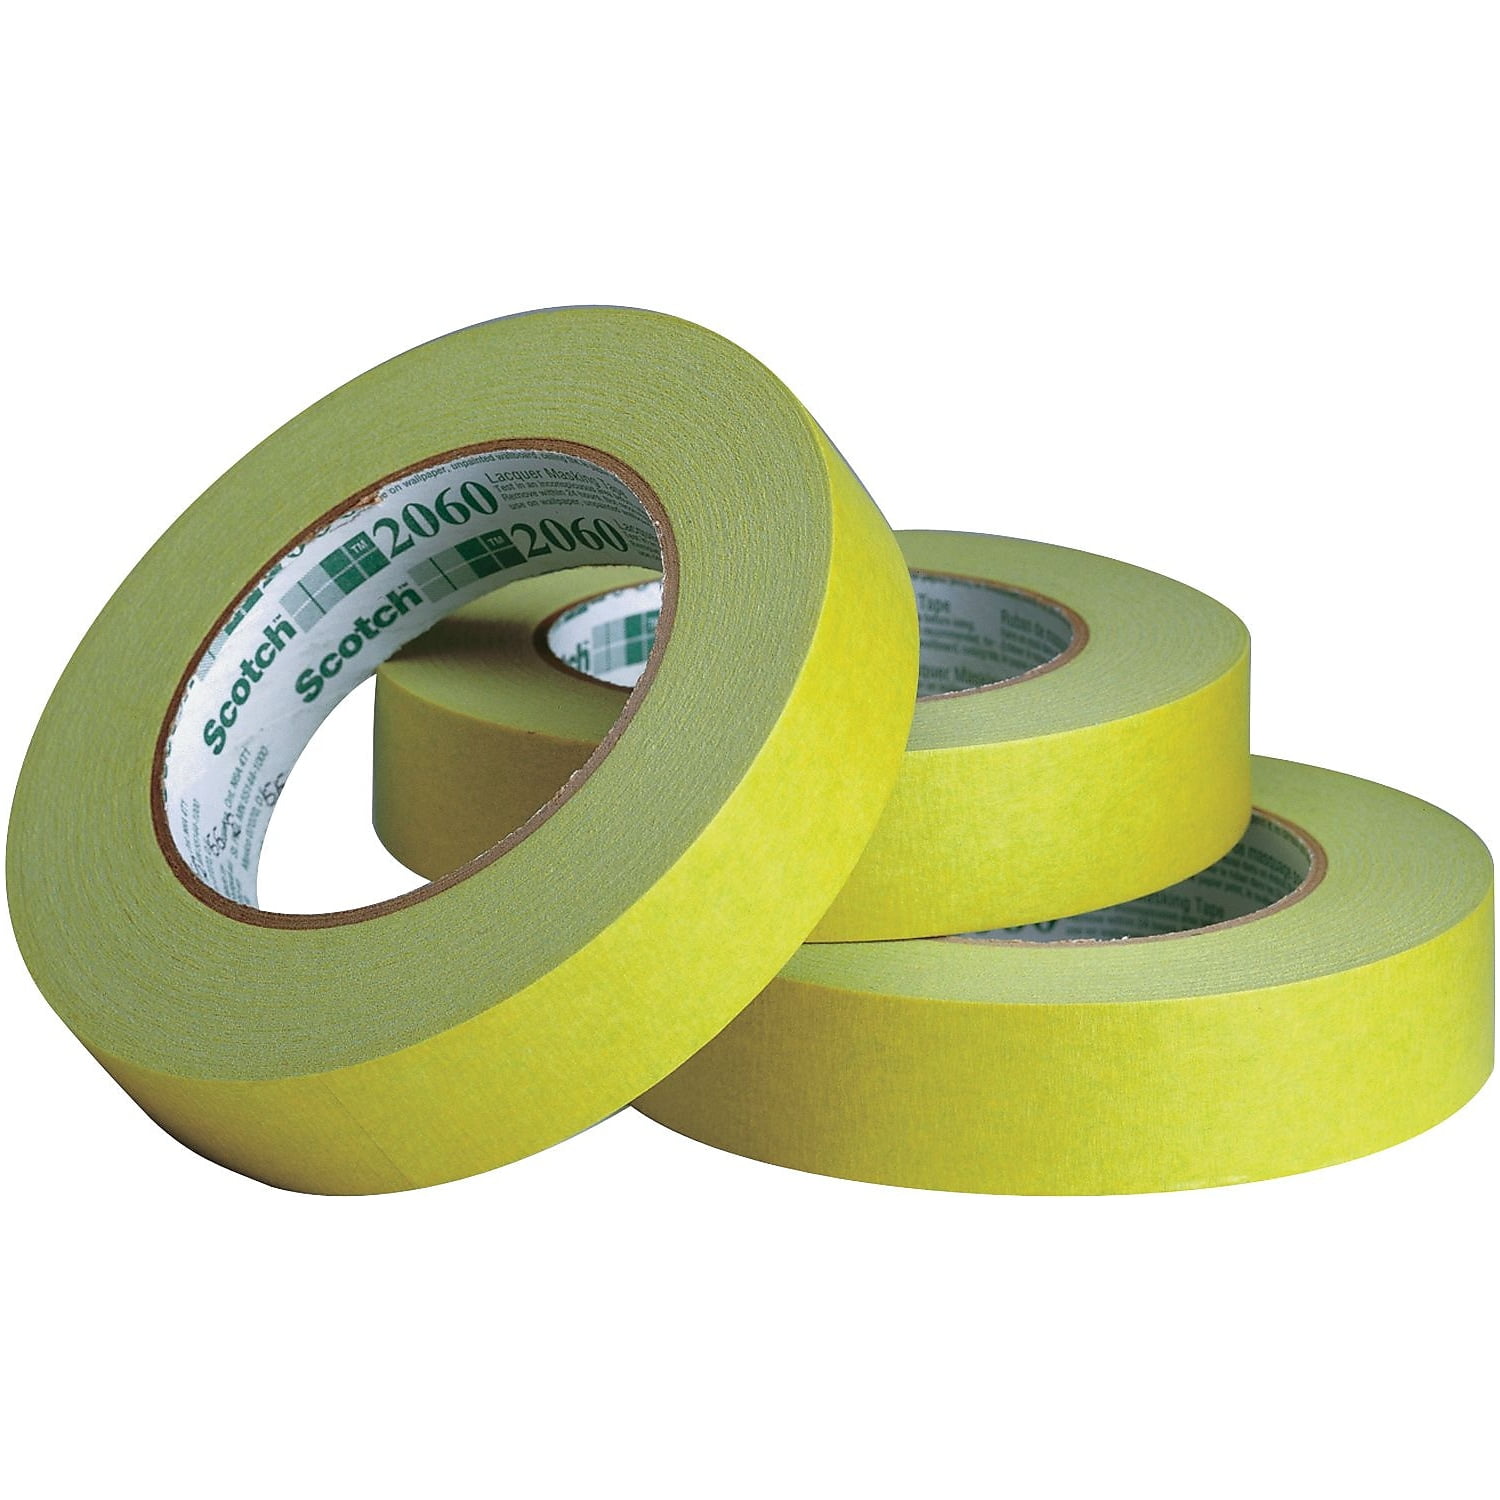 Scotch T935206012pk 1 In. X 60 Yards 2060 Masking Tape, Green - Pack Of 12